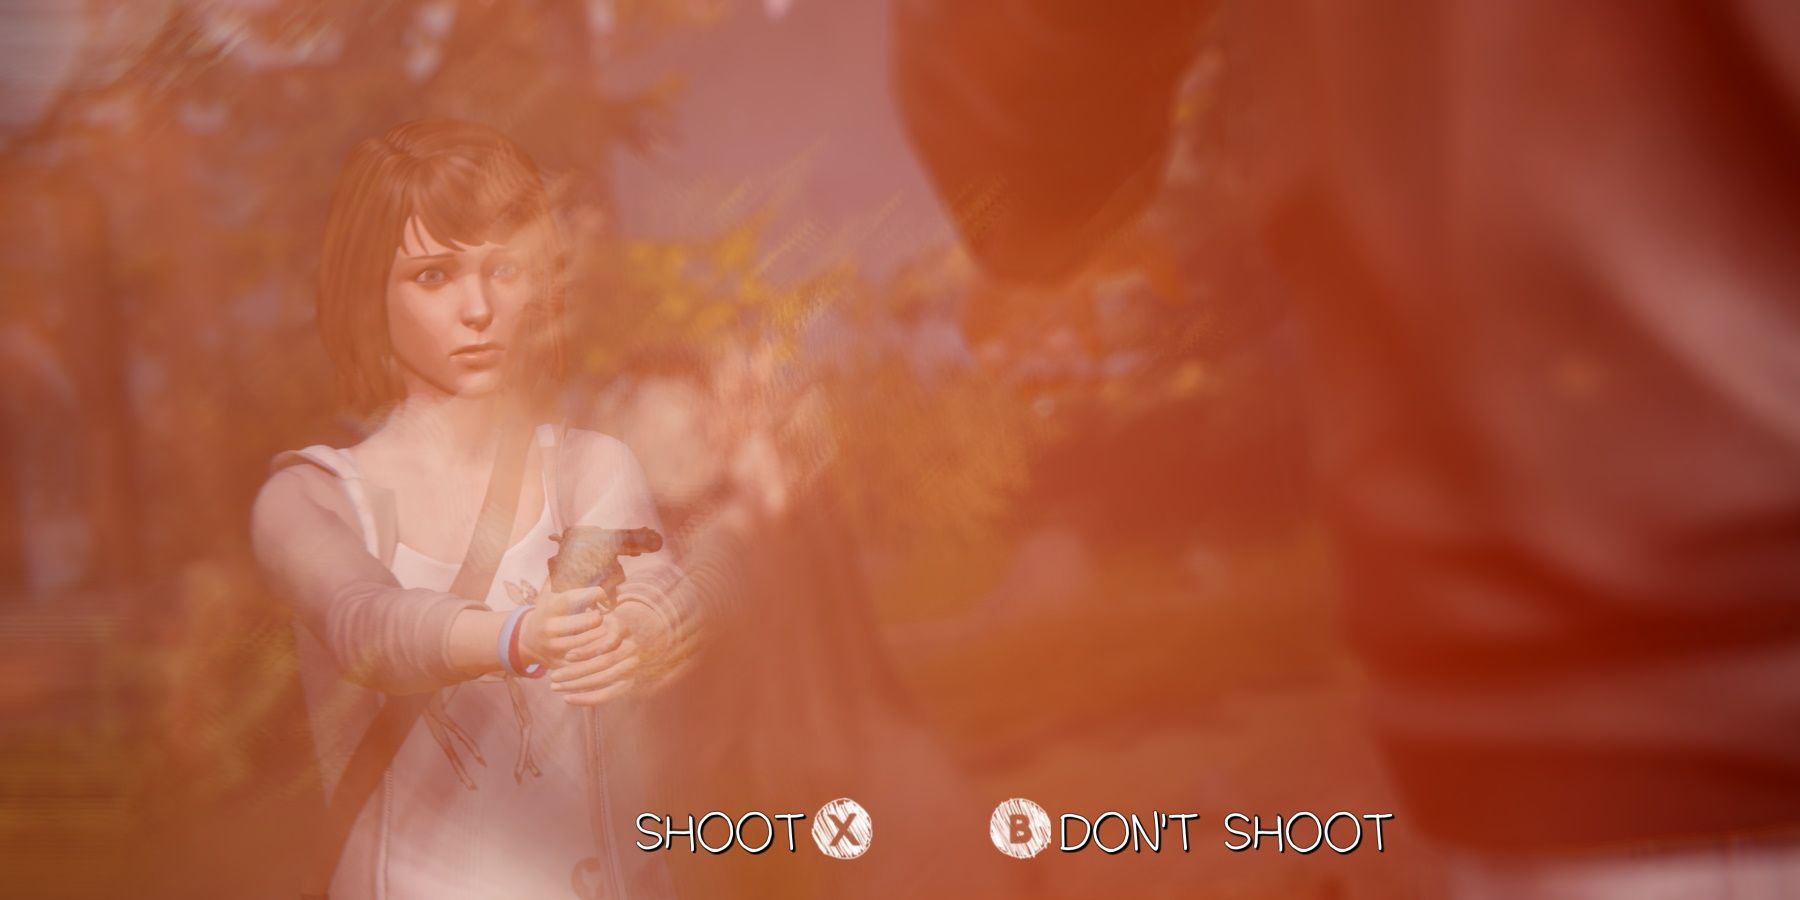 Max deciding to shoot Frank or not shoot Frank in episode 2 of Life is Strange